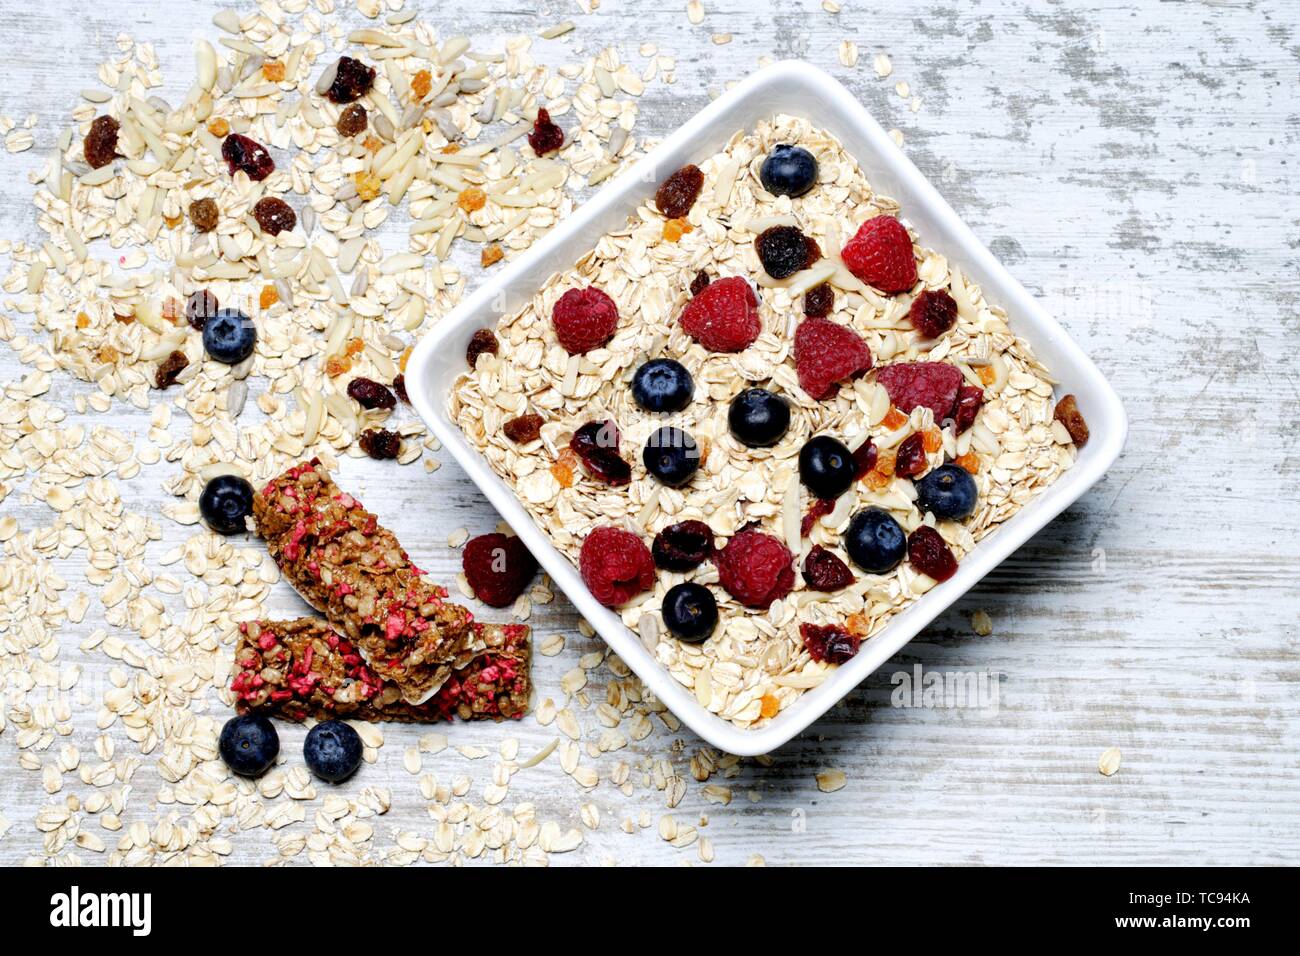 Oat grains with blueberries raspberries and cereal bars Stock Photo